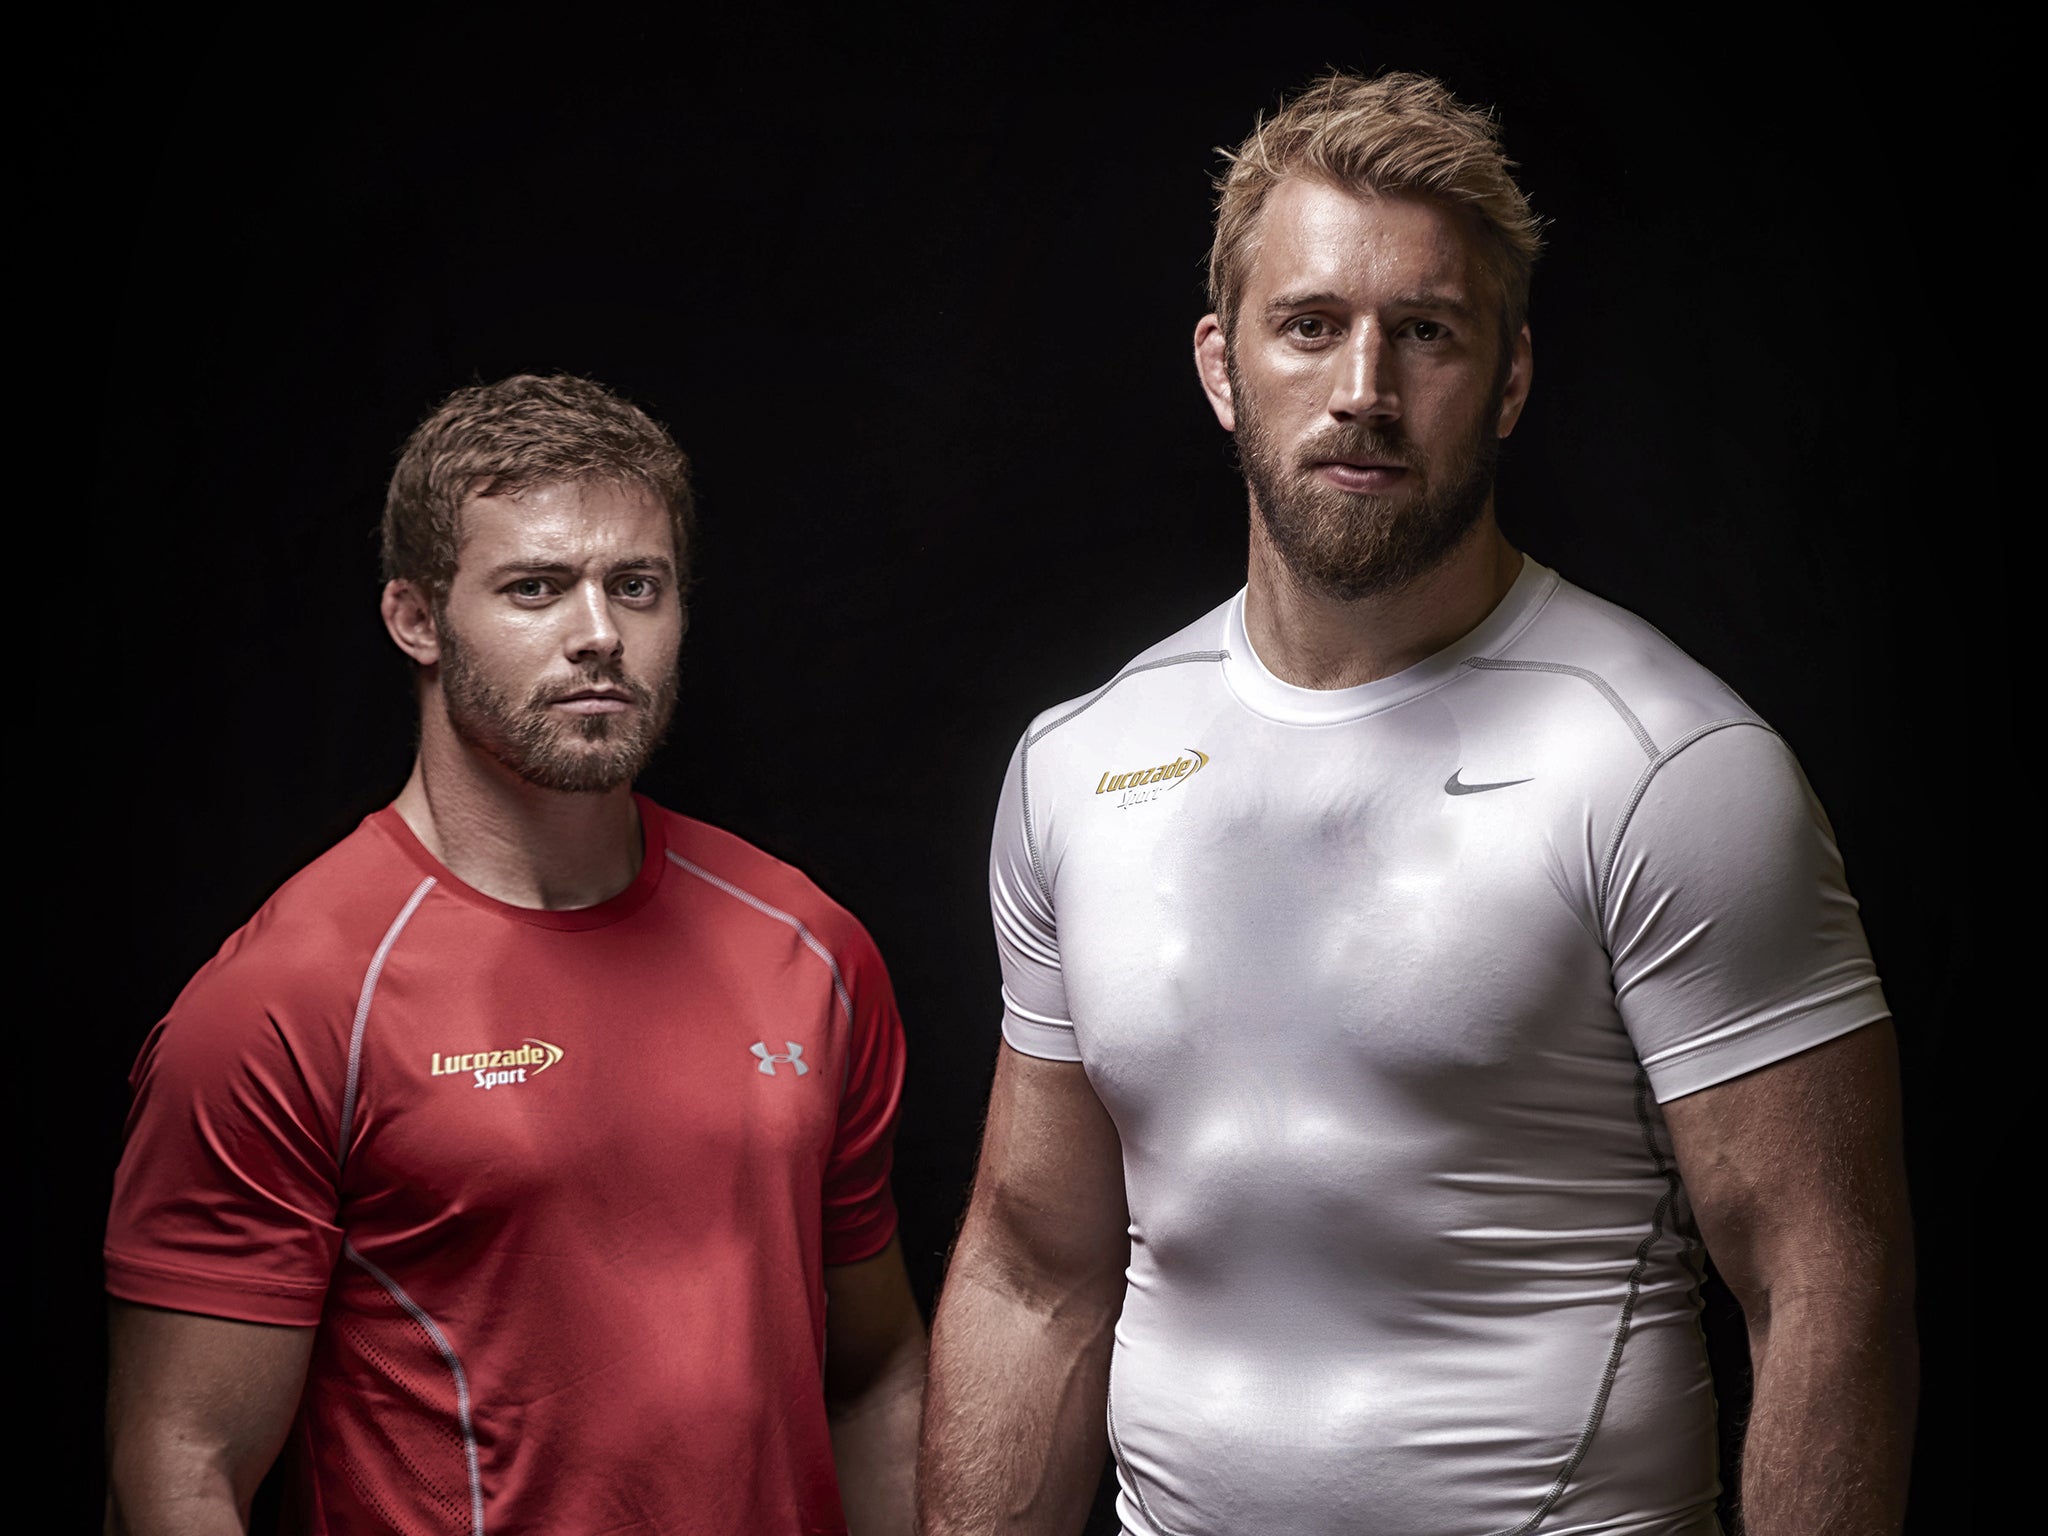 Leigh Halfpenny (left) and Chris Robshaw look forward
to a World Cup season